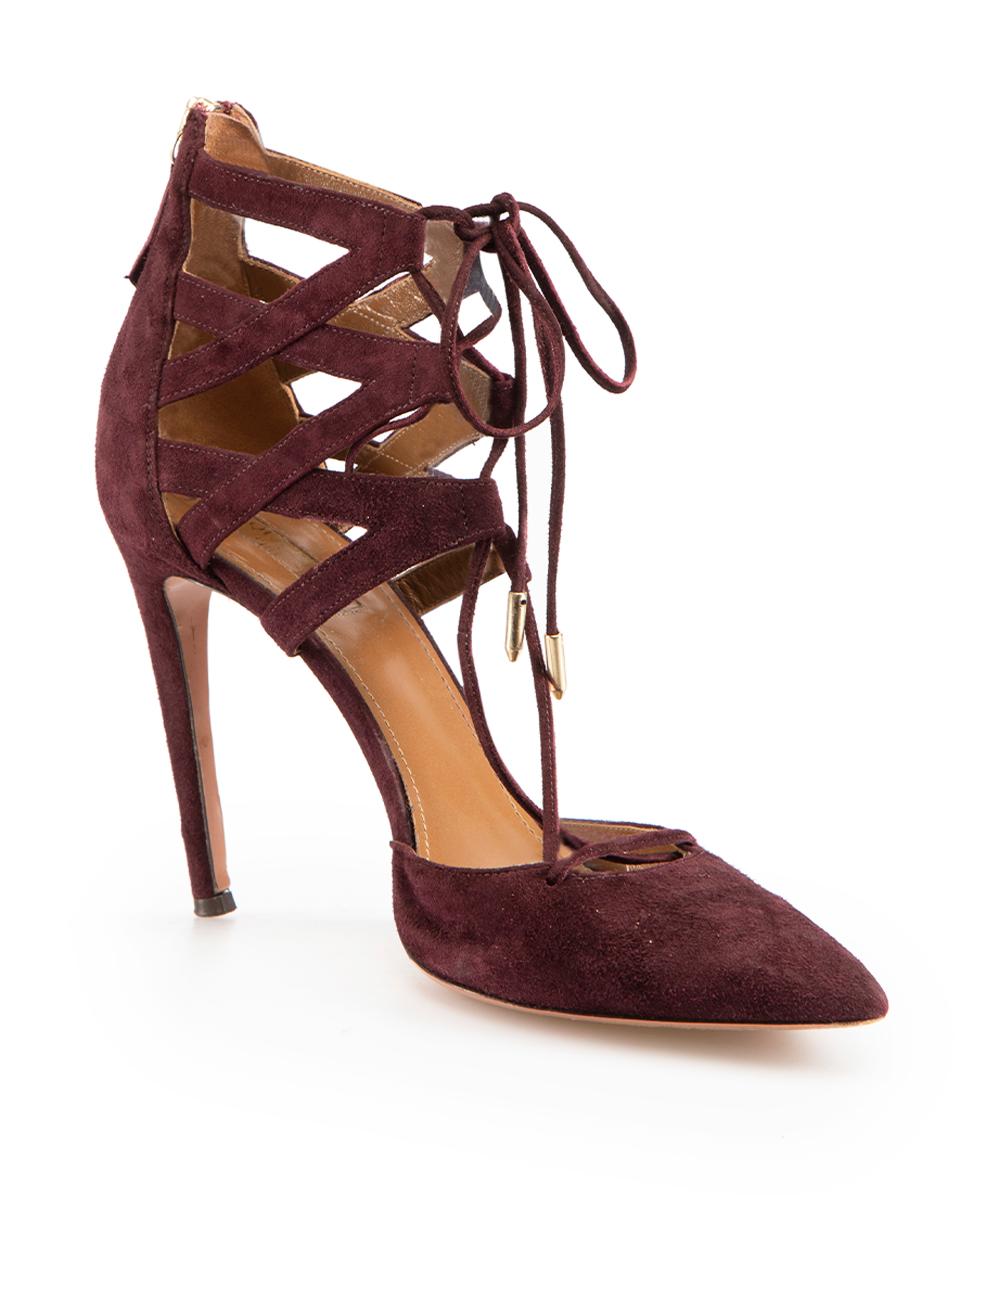 CONDITION is Very good. Minimal wear to shoes is evident. Minimal wear to both shoes with indents and abrasions to the heels on this used Aquazzura designer resale item.

Details
Belgiavia
Burgundy
Suede
Heels
Lace up front
Back zip fastening
Point